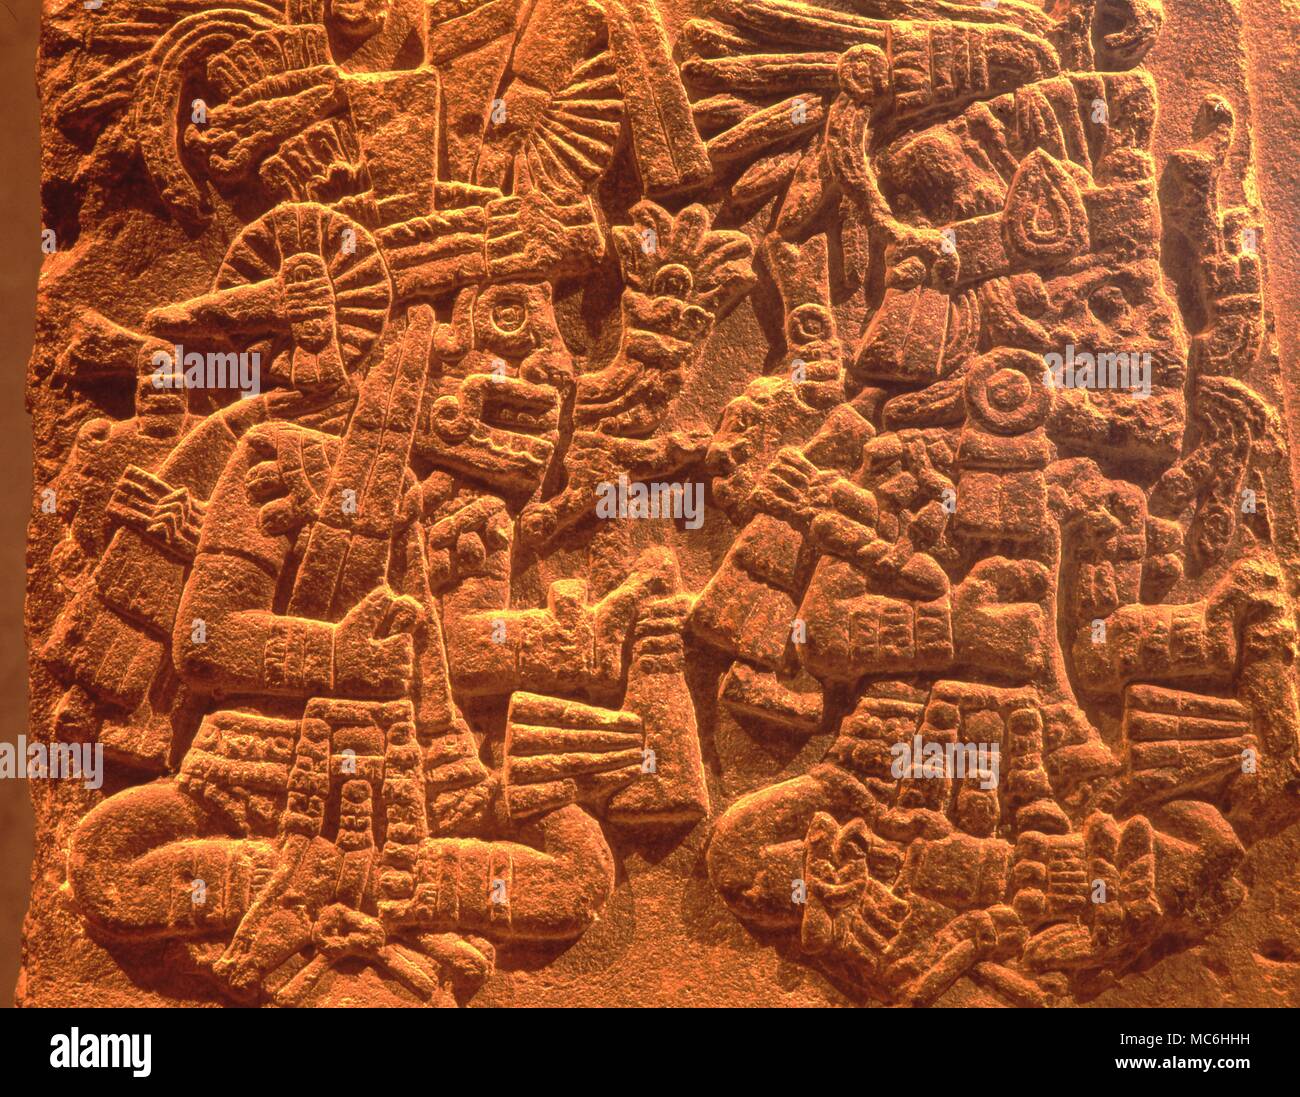 Mexican Mythology. Bas relief of Aztec solar disk, flanked by Huitzilopochtli and Tezcatlipola. National Anthropological Museum. Mexico City. Stock Photo